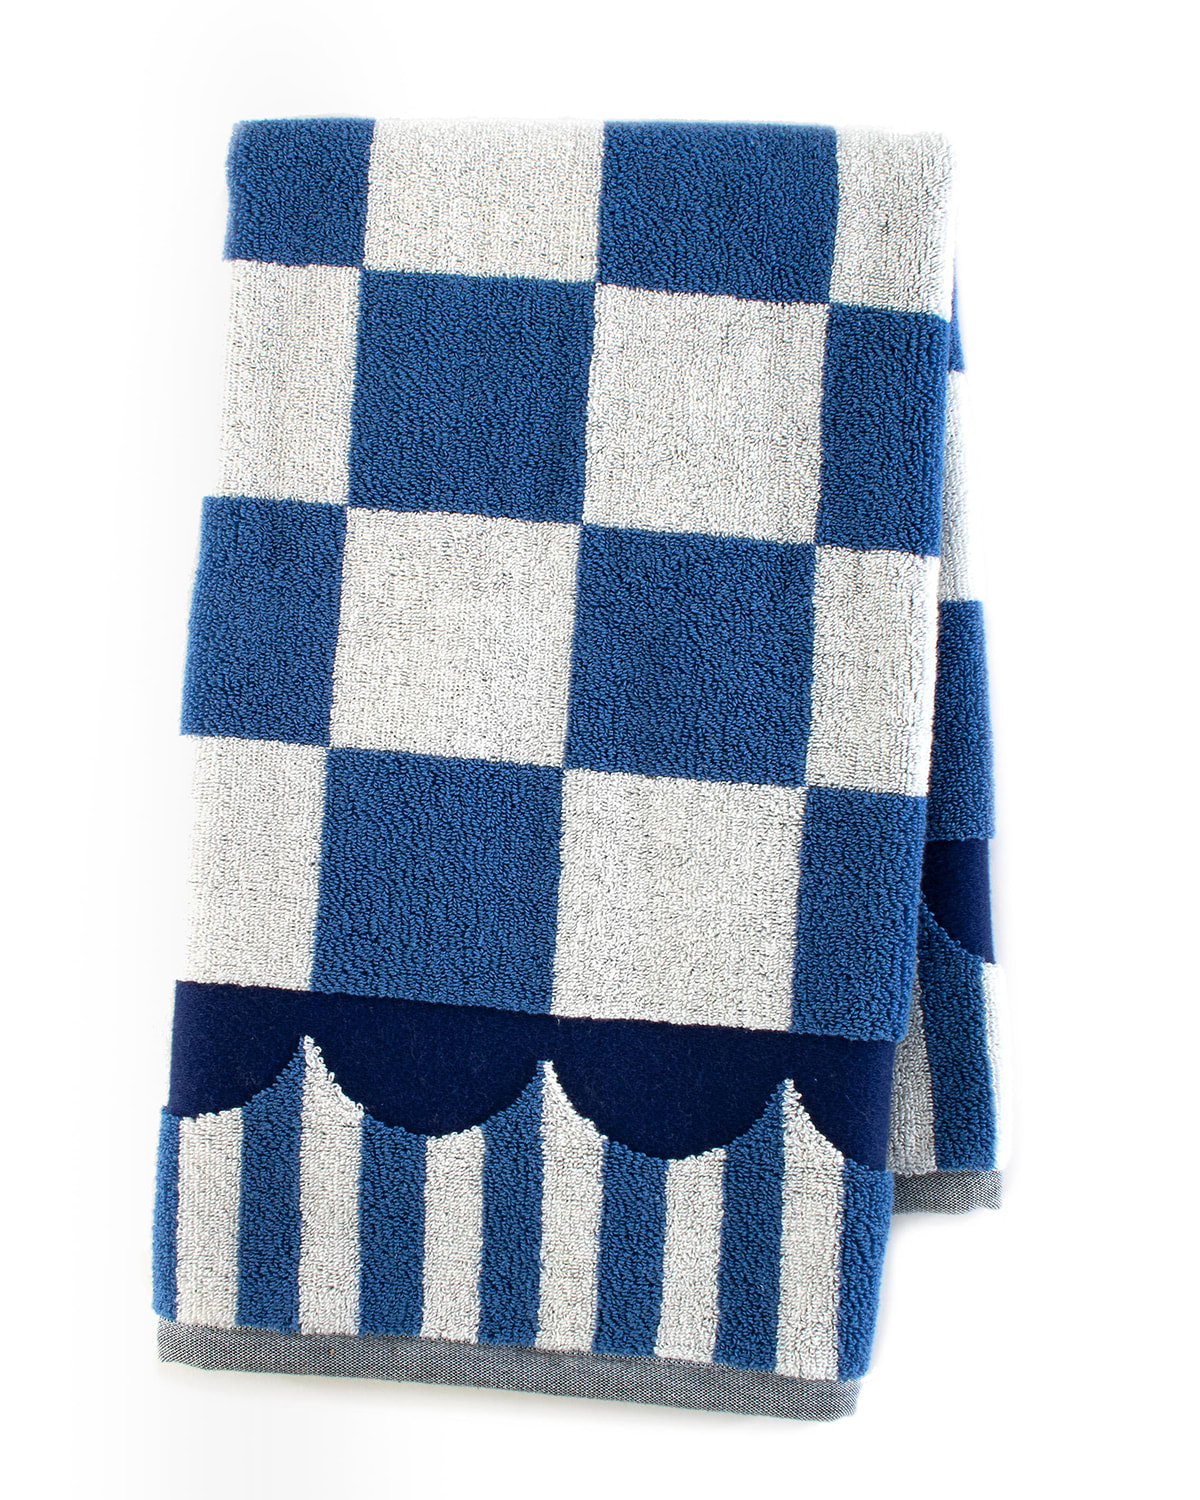 Mackenzie-childs Royal Check Hand Towel In Blue/white